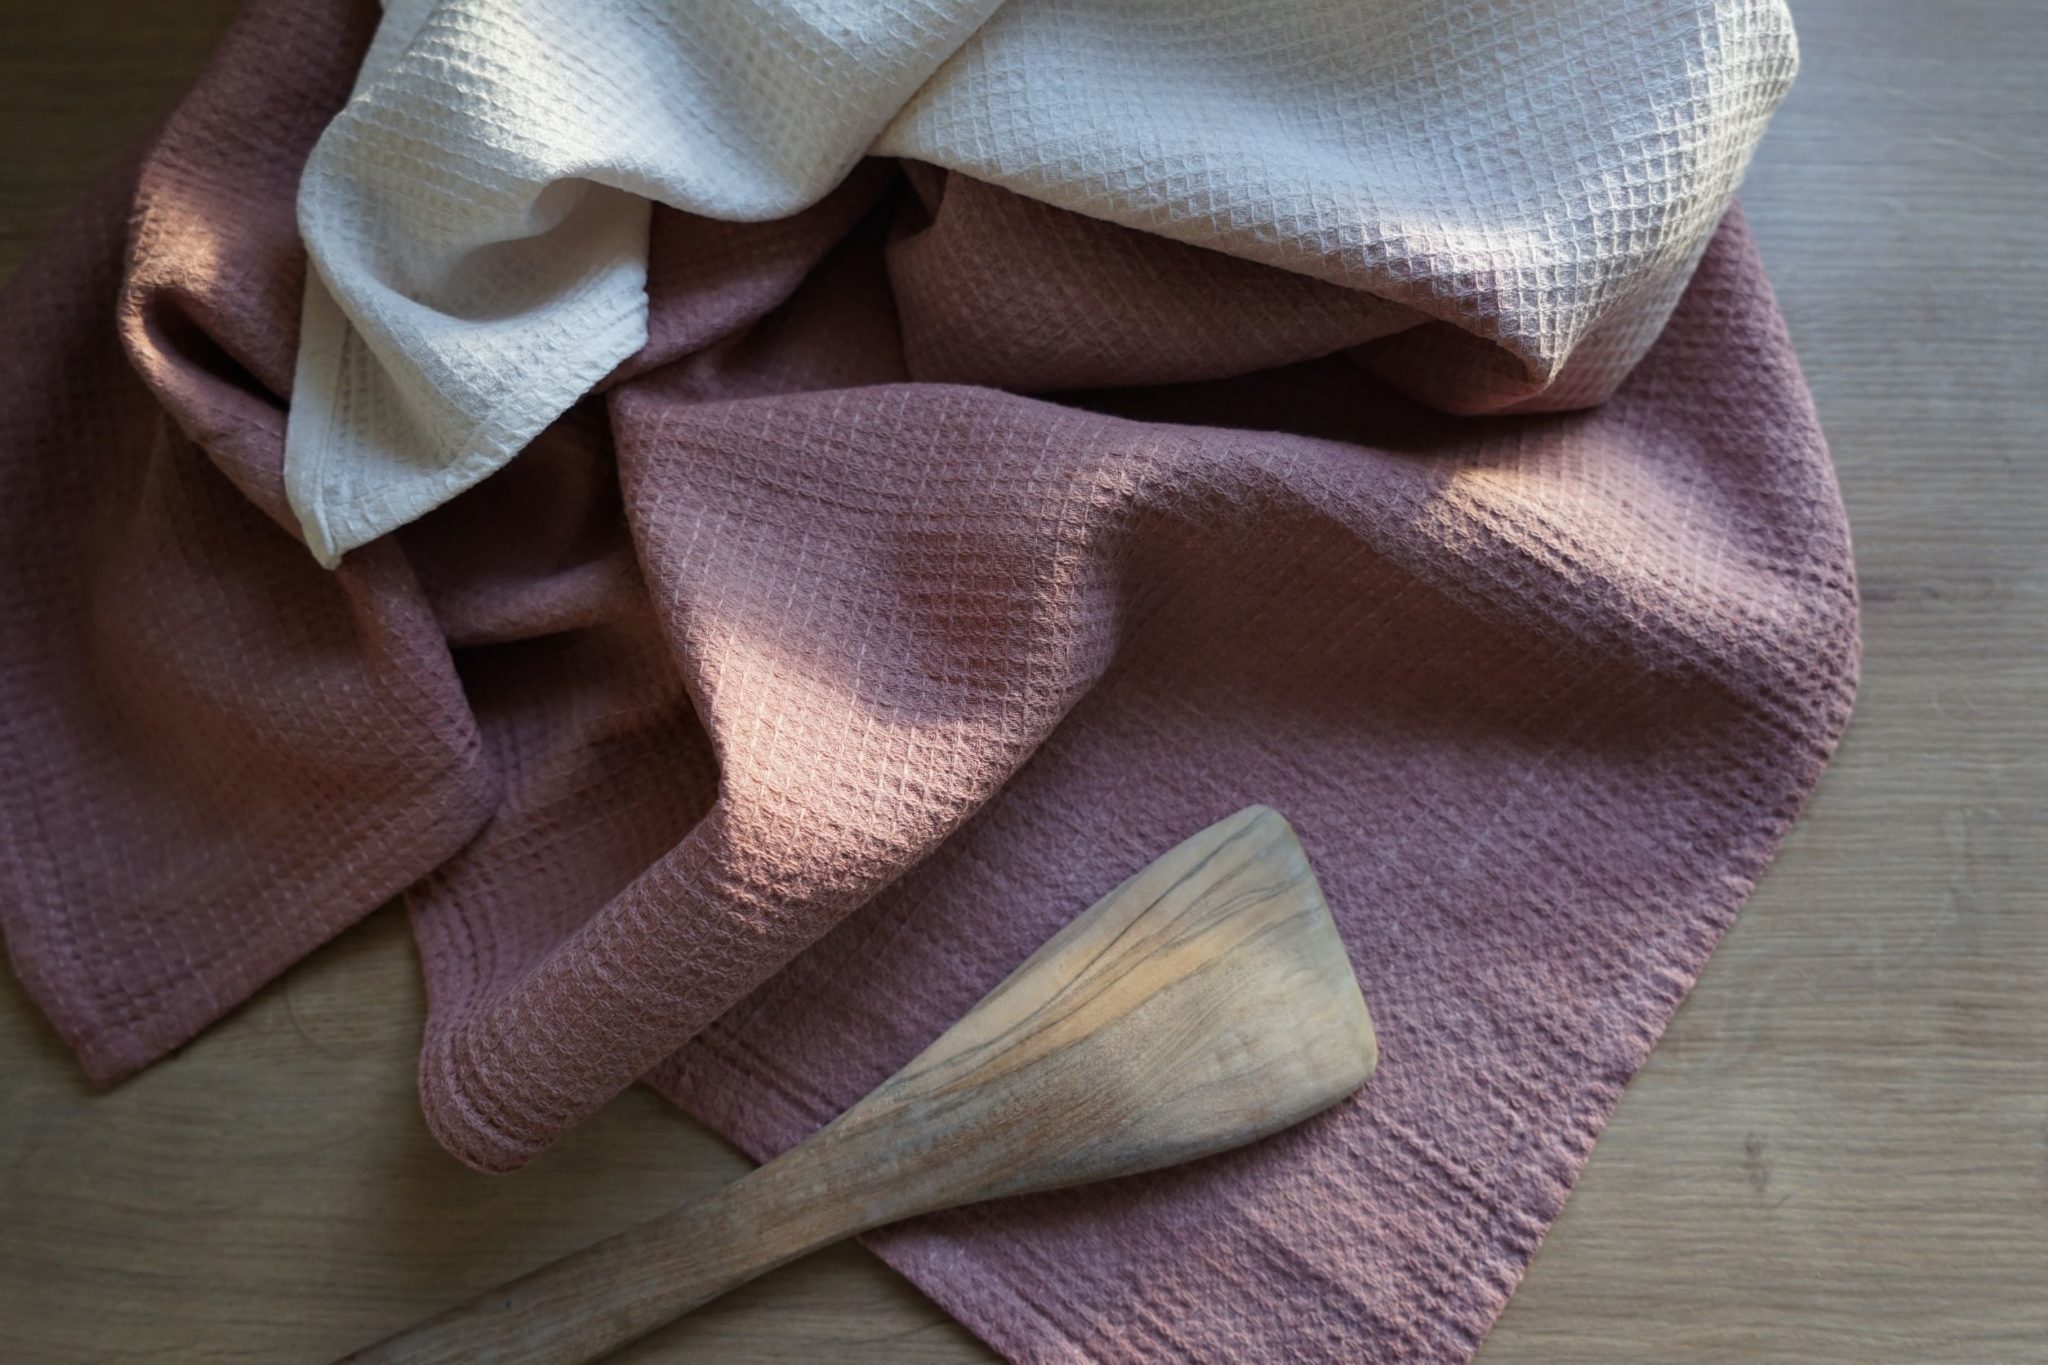 Dyeing Fabric - MADE EVERYDAY